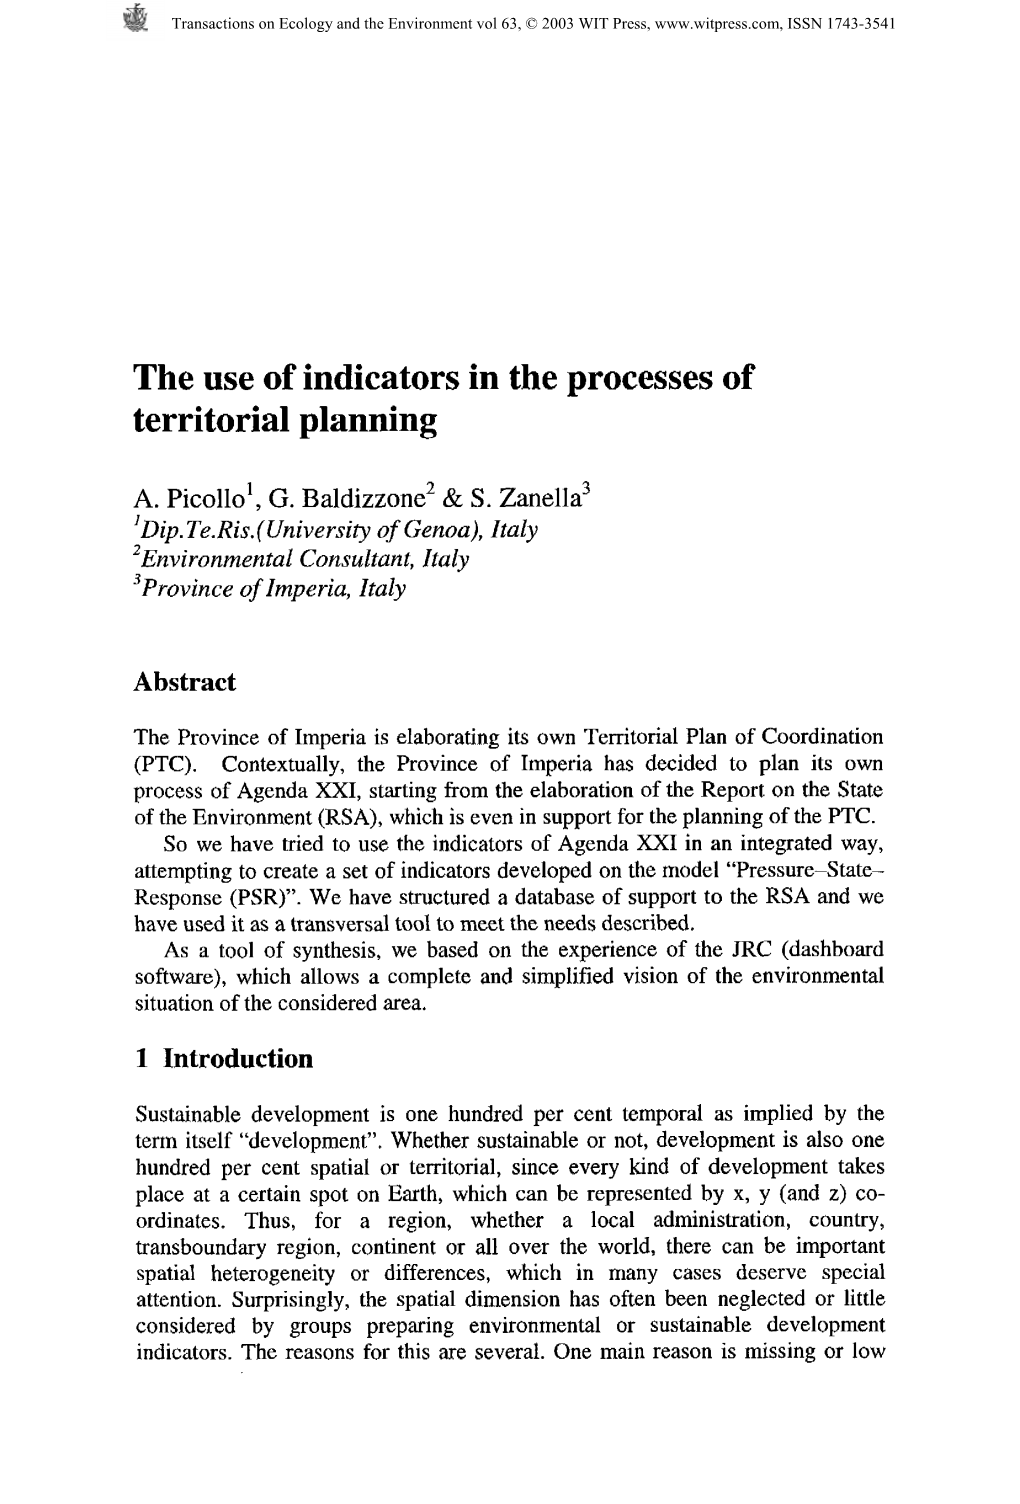 The Use of Indicators in the Processes of Territorial Planning